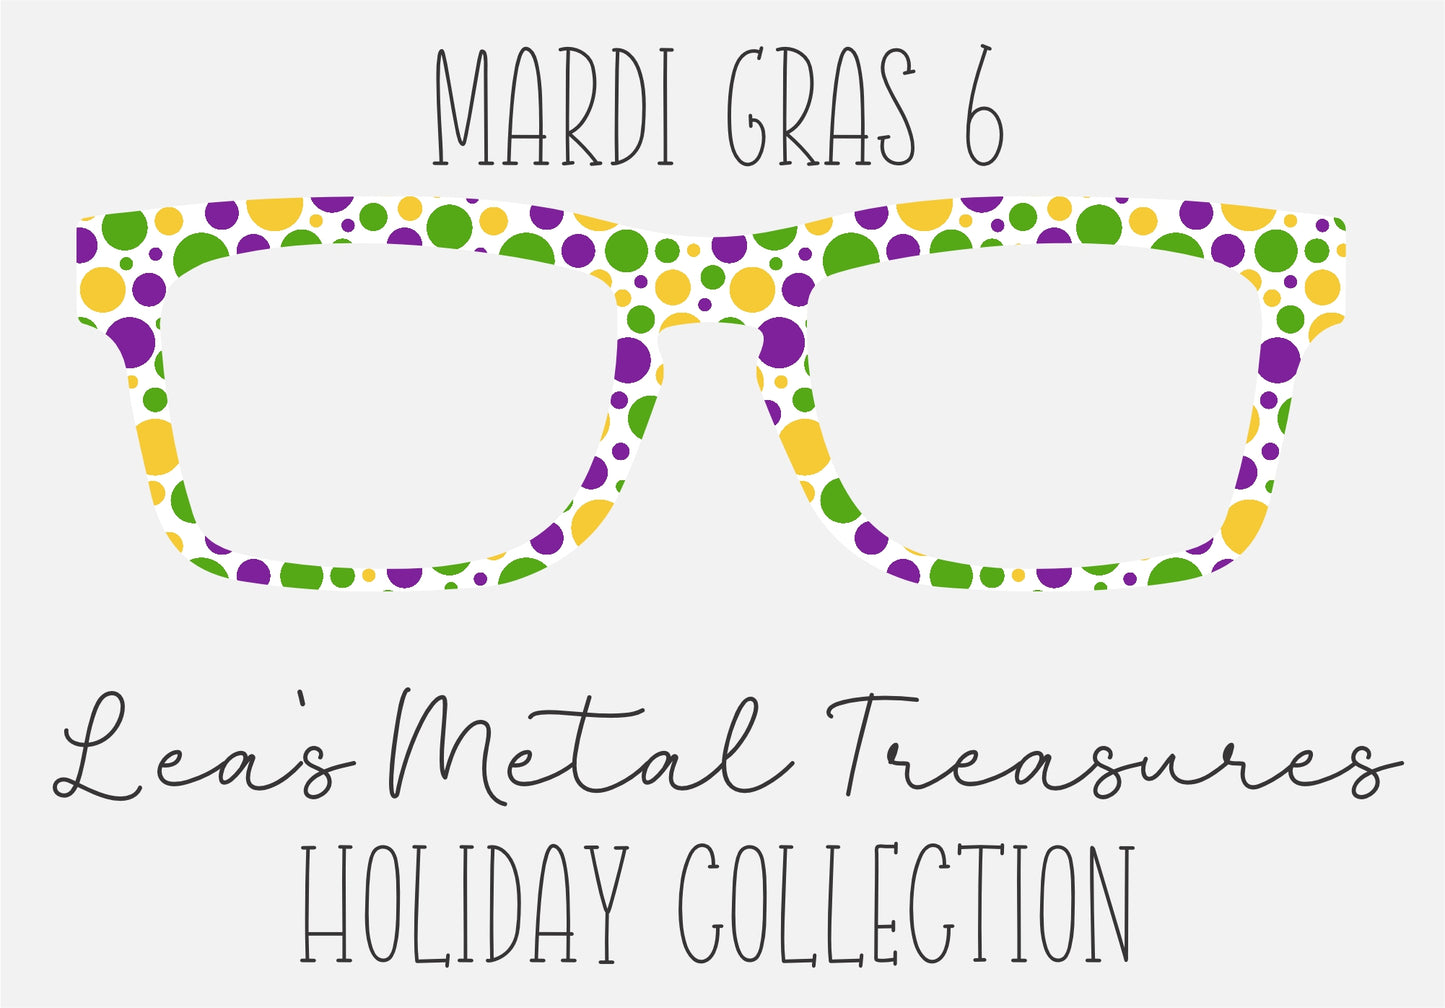 MARDI GRAS 6 Eyewear Frame Toppers COMES WITH MAGNETS